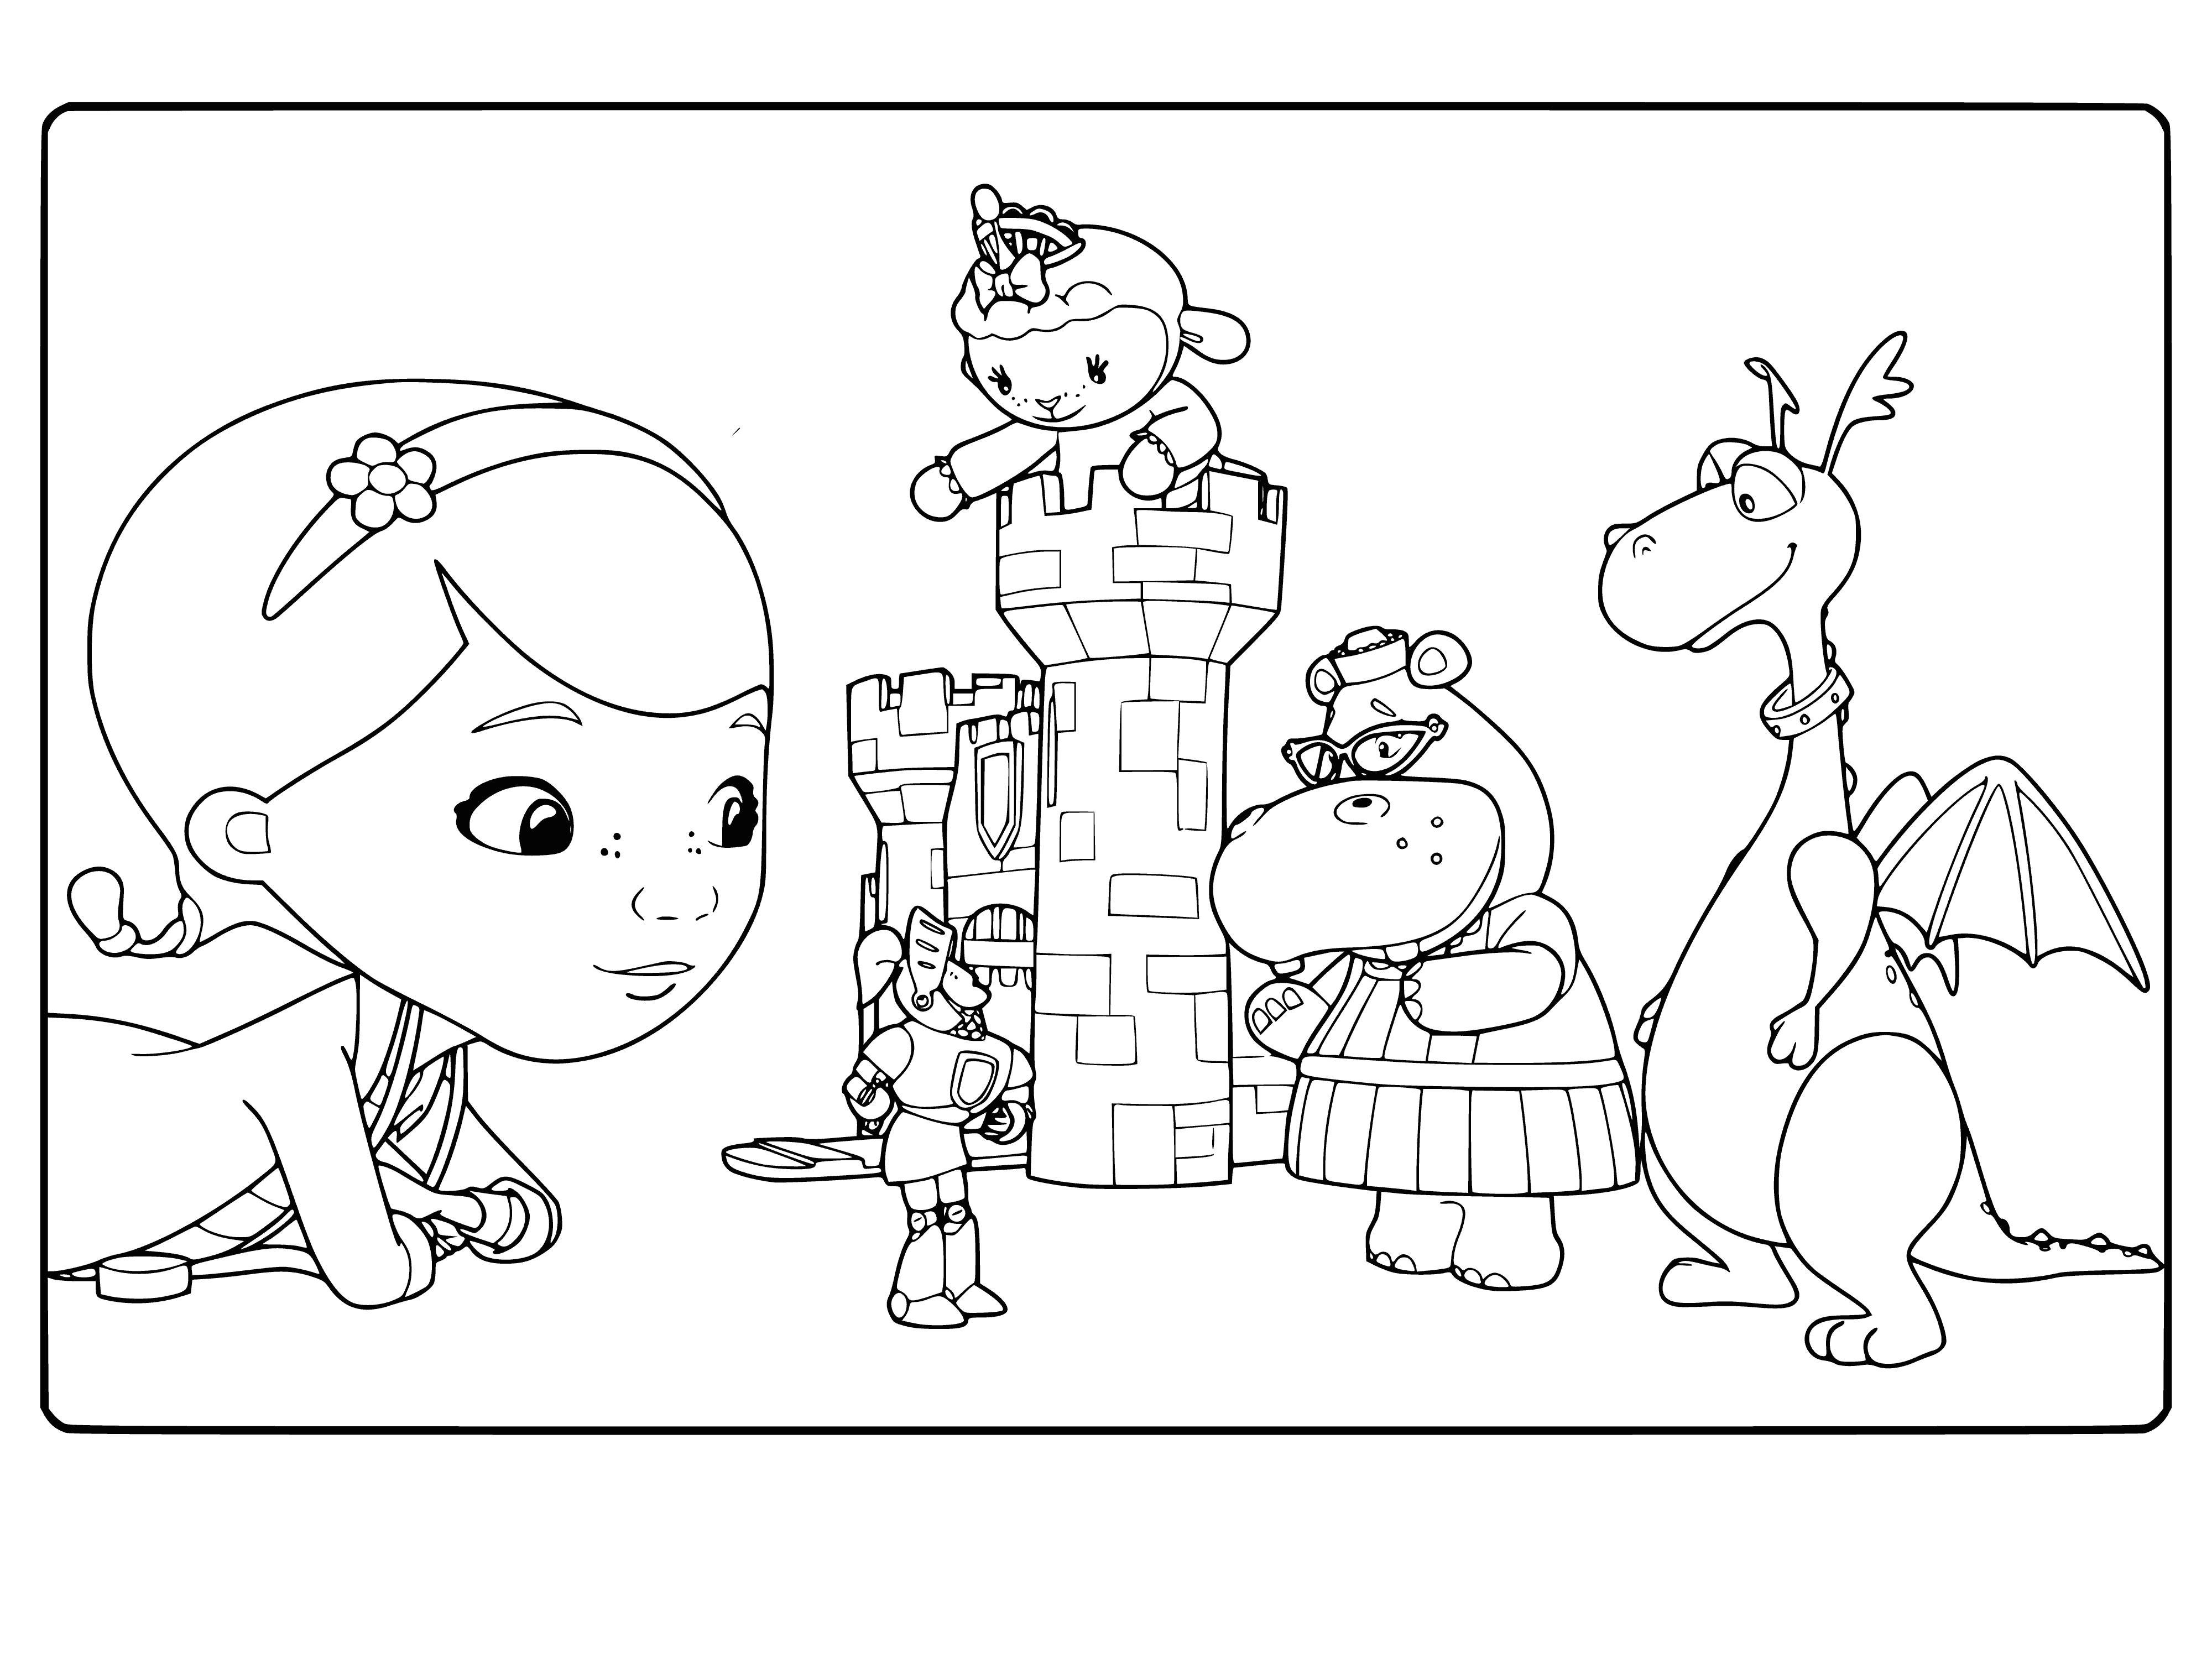 Princess Lammy and Knight Sir Kirby coloring page